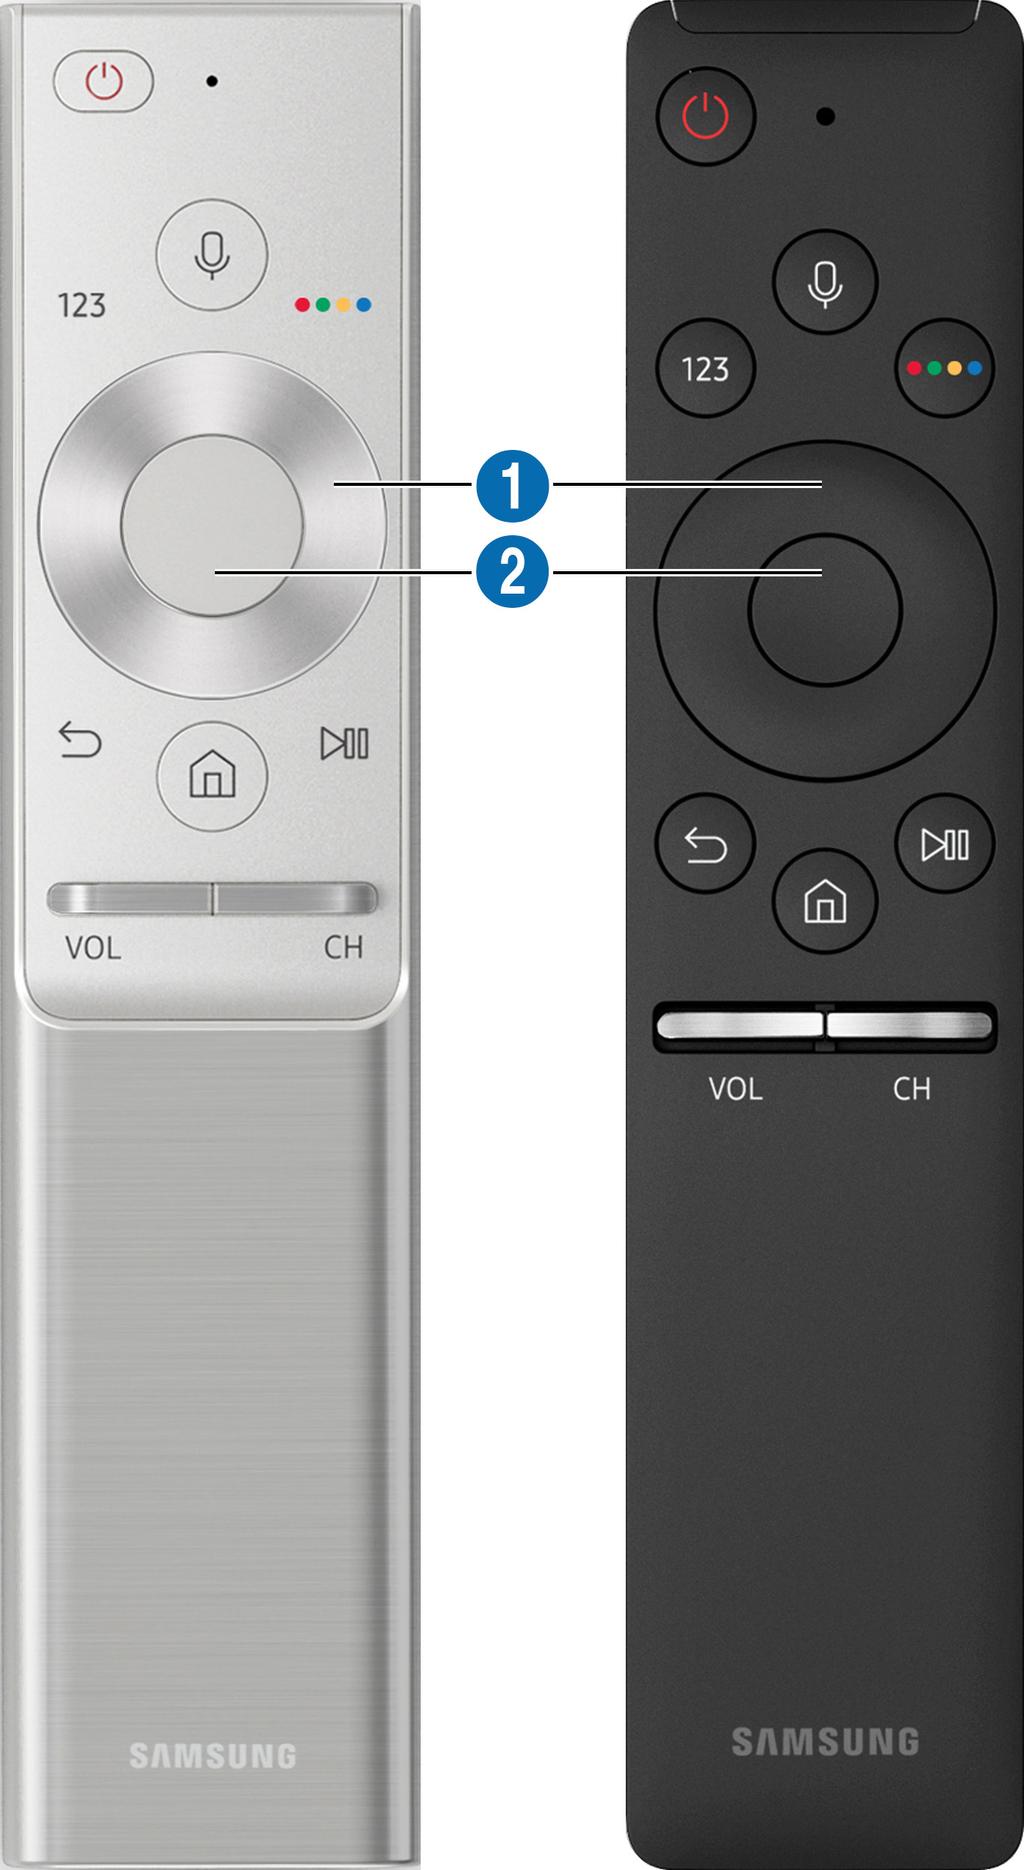 Remote Control and Peripherals You can control TV operations